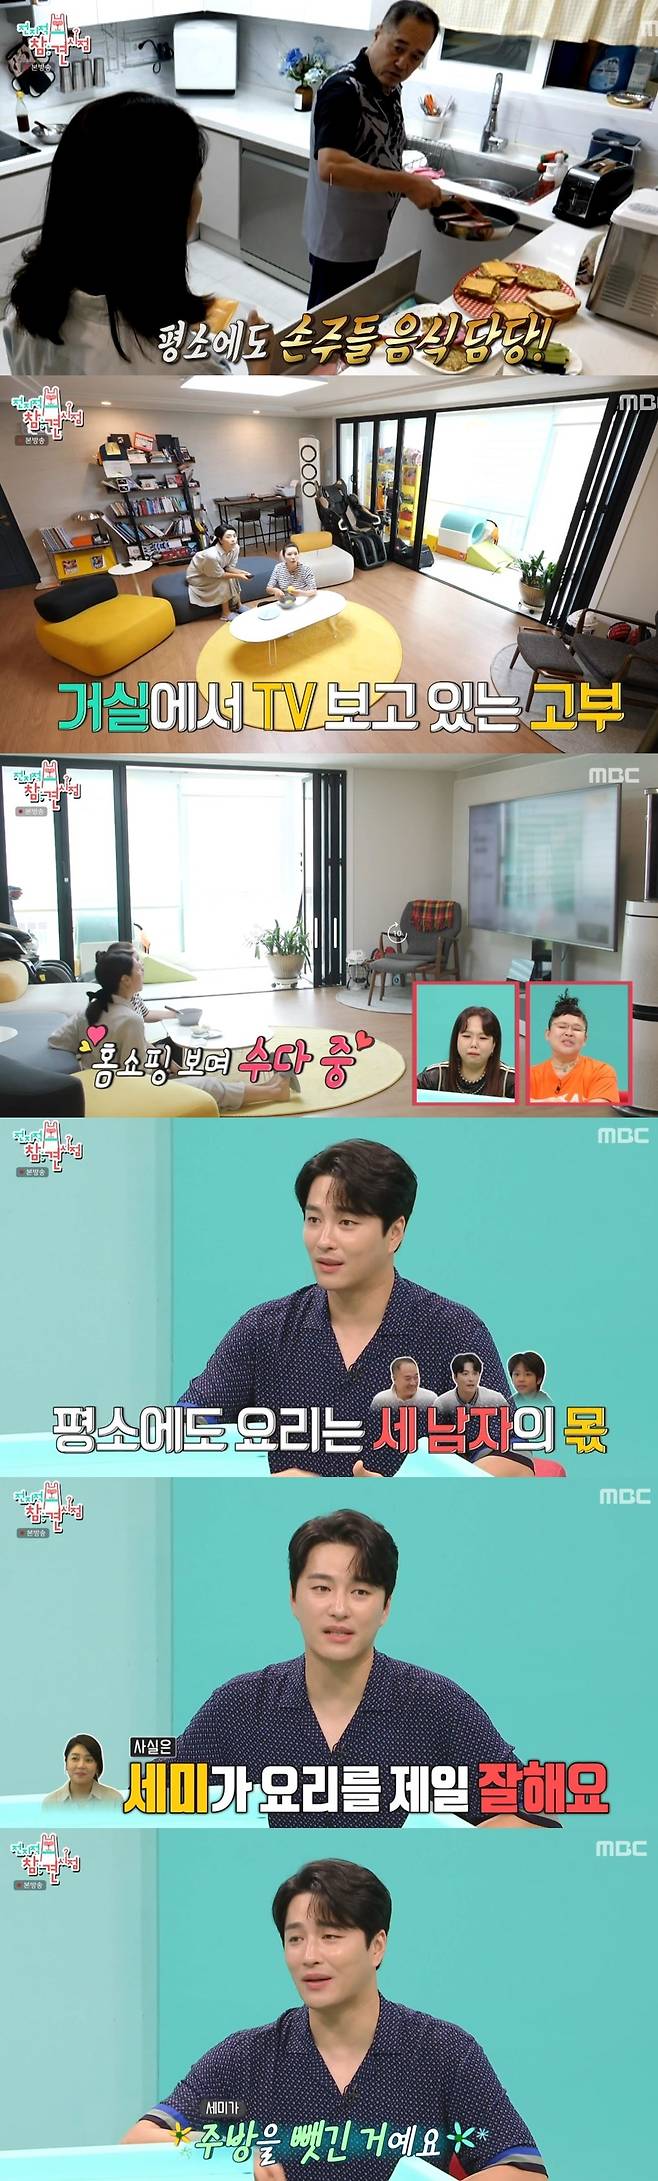 Point of Omniscient Interfere Min Woo Hyuk revealed the family that men naturally Cuisine.On August 12, MBC  ⁇ Point Point of Omniscient Interfere  (hereinafter referred to as Point of Omniscient Interfere), Min Woo Hyuk appeared as a guest.On this day, Min Woo Hyuk opened the broadcast with Fathers Cuisine.My father, who is always a cuisine for his family, prepared a cuisine for the manager, and Min Woo Hyuk said, He had a restaurant on the construction site. He came in at 1000 people a meal.While Min Woo Hyuk and Father were Cuisine, mother-in-law and daughter-in-law Lee Se-mi enjoyed watching television and led the studios hot reaction.Then The Kitchen was joined by Min Woo Hyuks son Eden, who naturally grinds garlic, and Min Woo Hyuk said, This is what we do every day, in fact, Mr. Semy does the best with Cuisine.Ive been a Cuisine pro for a long time and Im like a chef. I just lost The Kitchen to my father. Lee Young-ja, who watched the video, admired, The real Parent must have lived a good life. You are blessed.